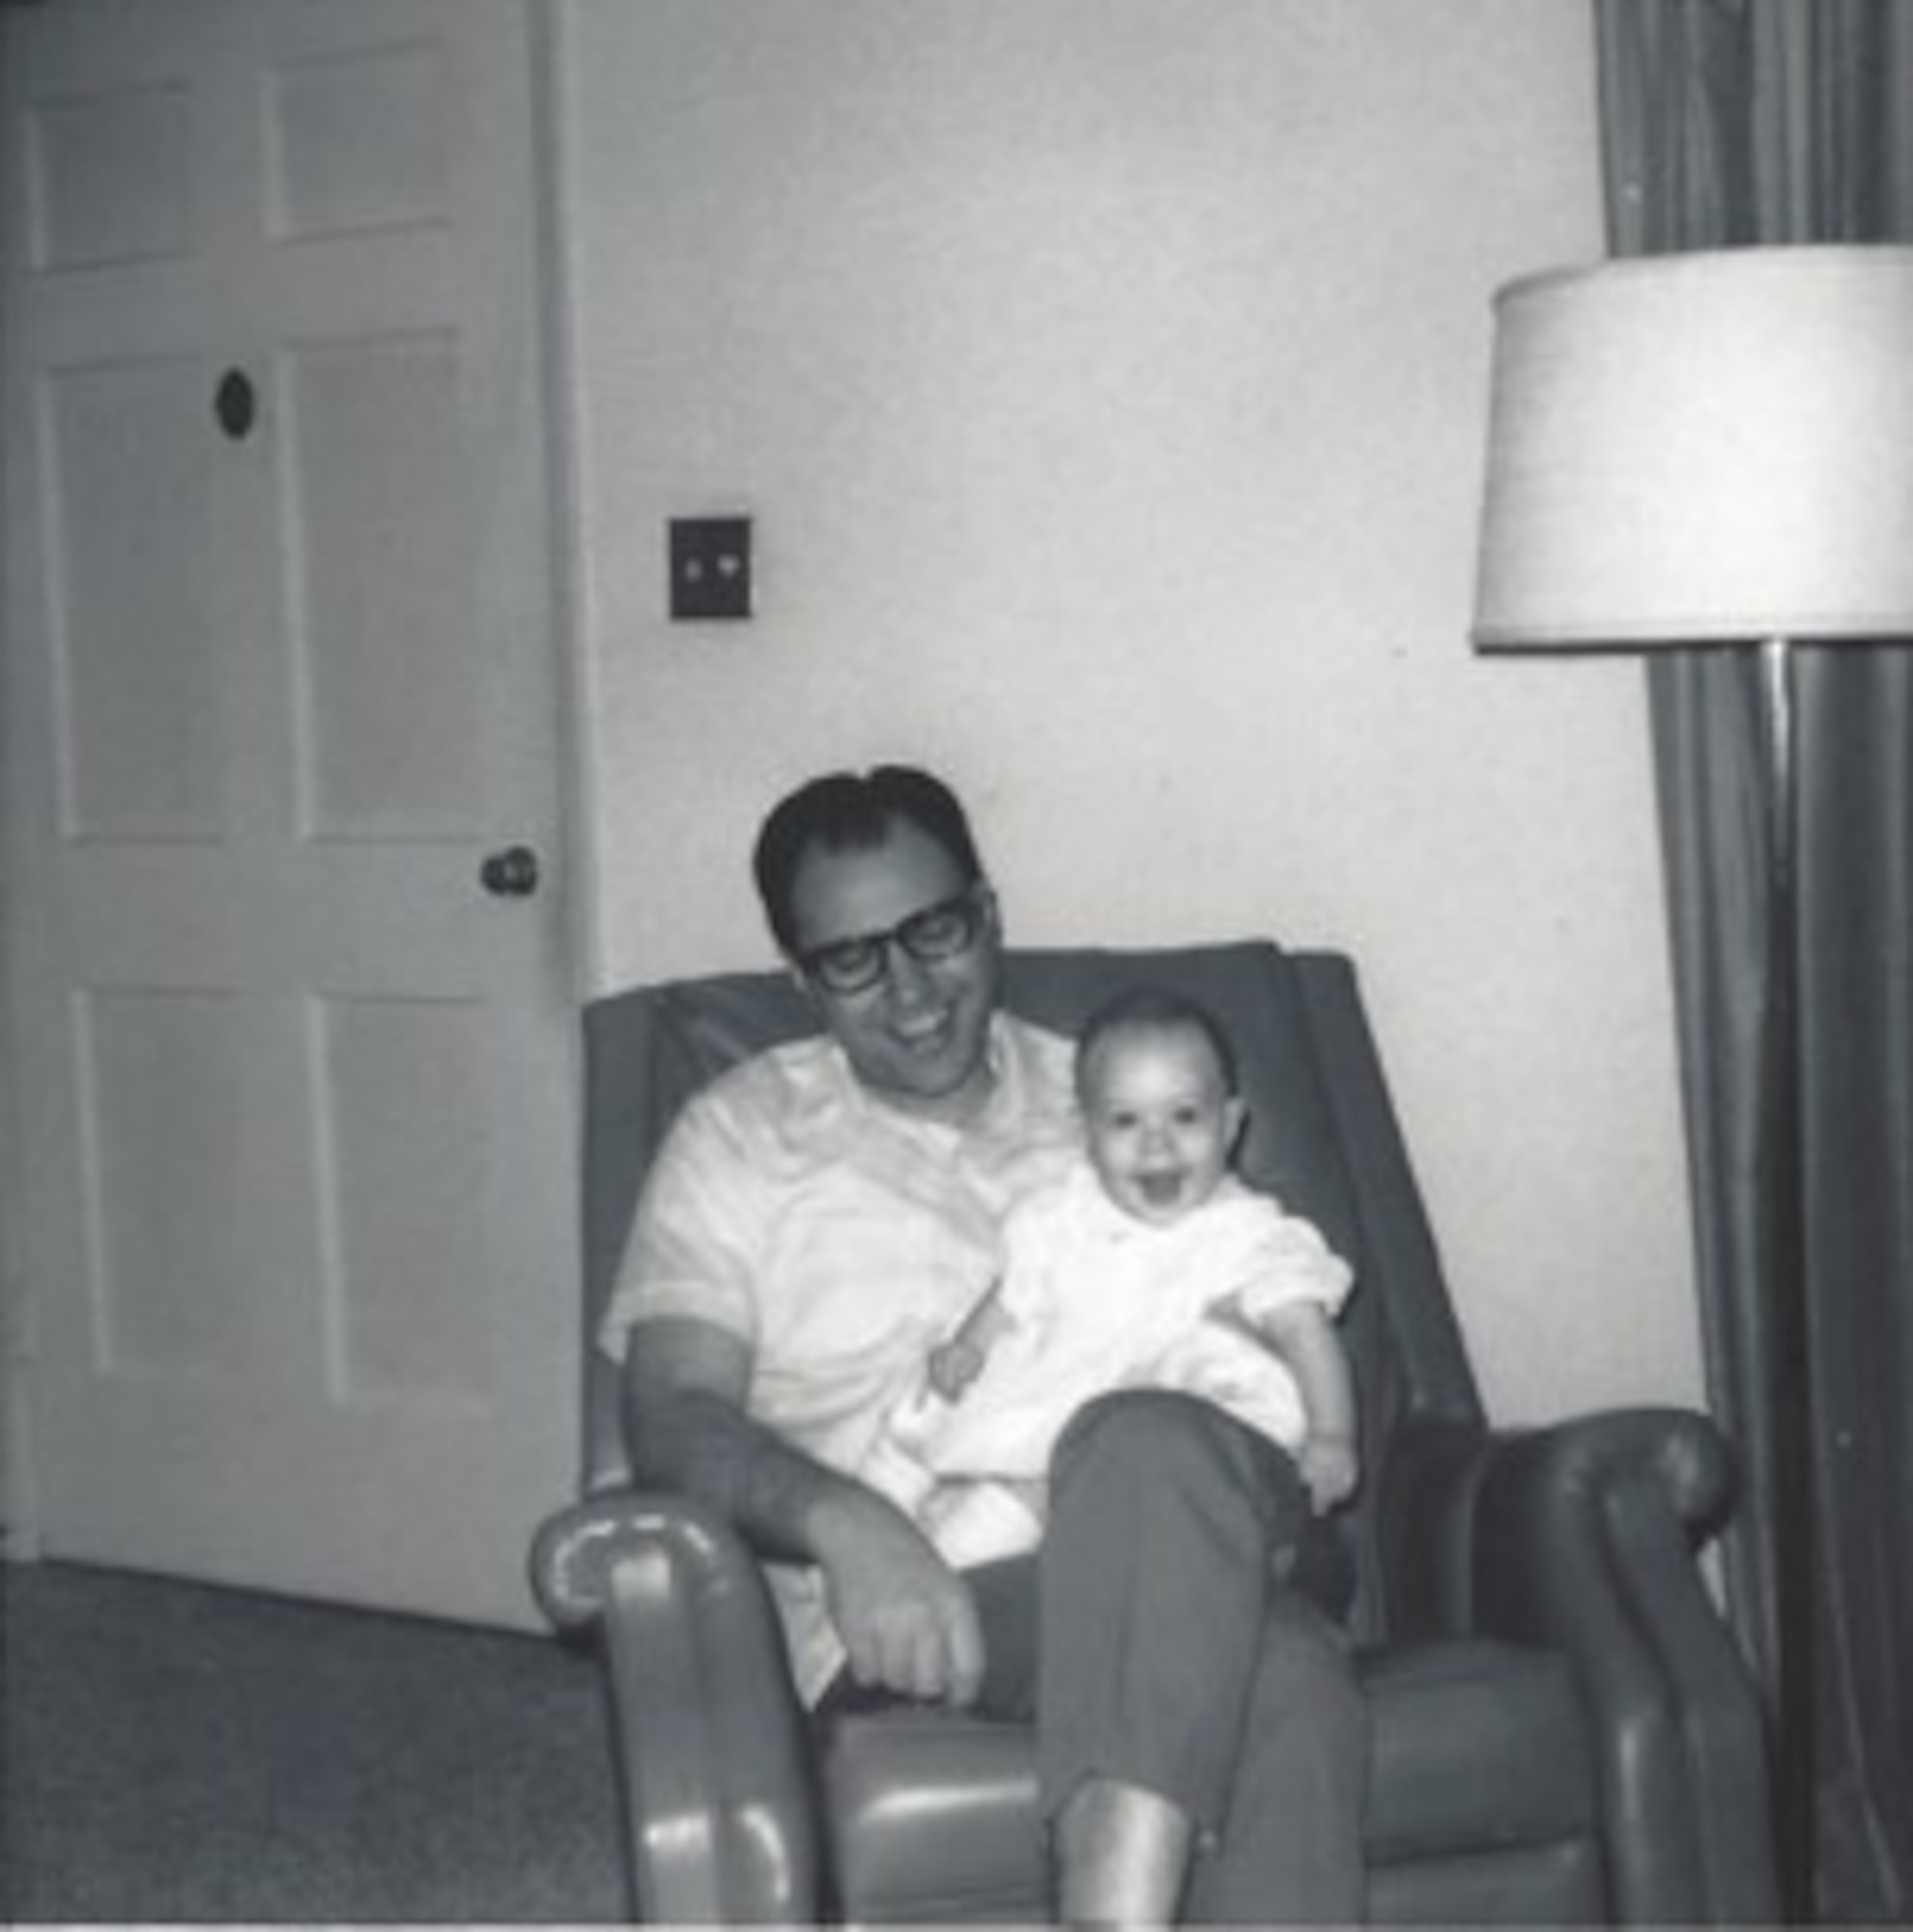 Dr. Edward Tagliaferri and his daughter Monique taken in the 1960's. At the time, he was a young physicist working at TRW in Redondo Beach, Calif. 